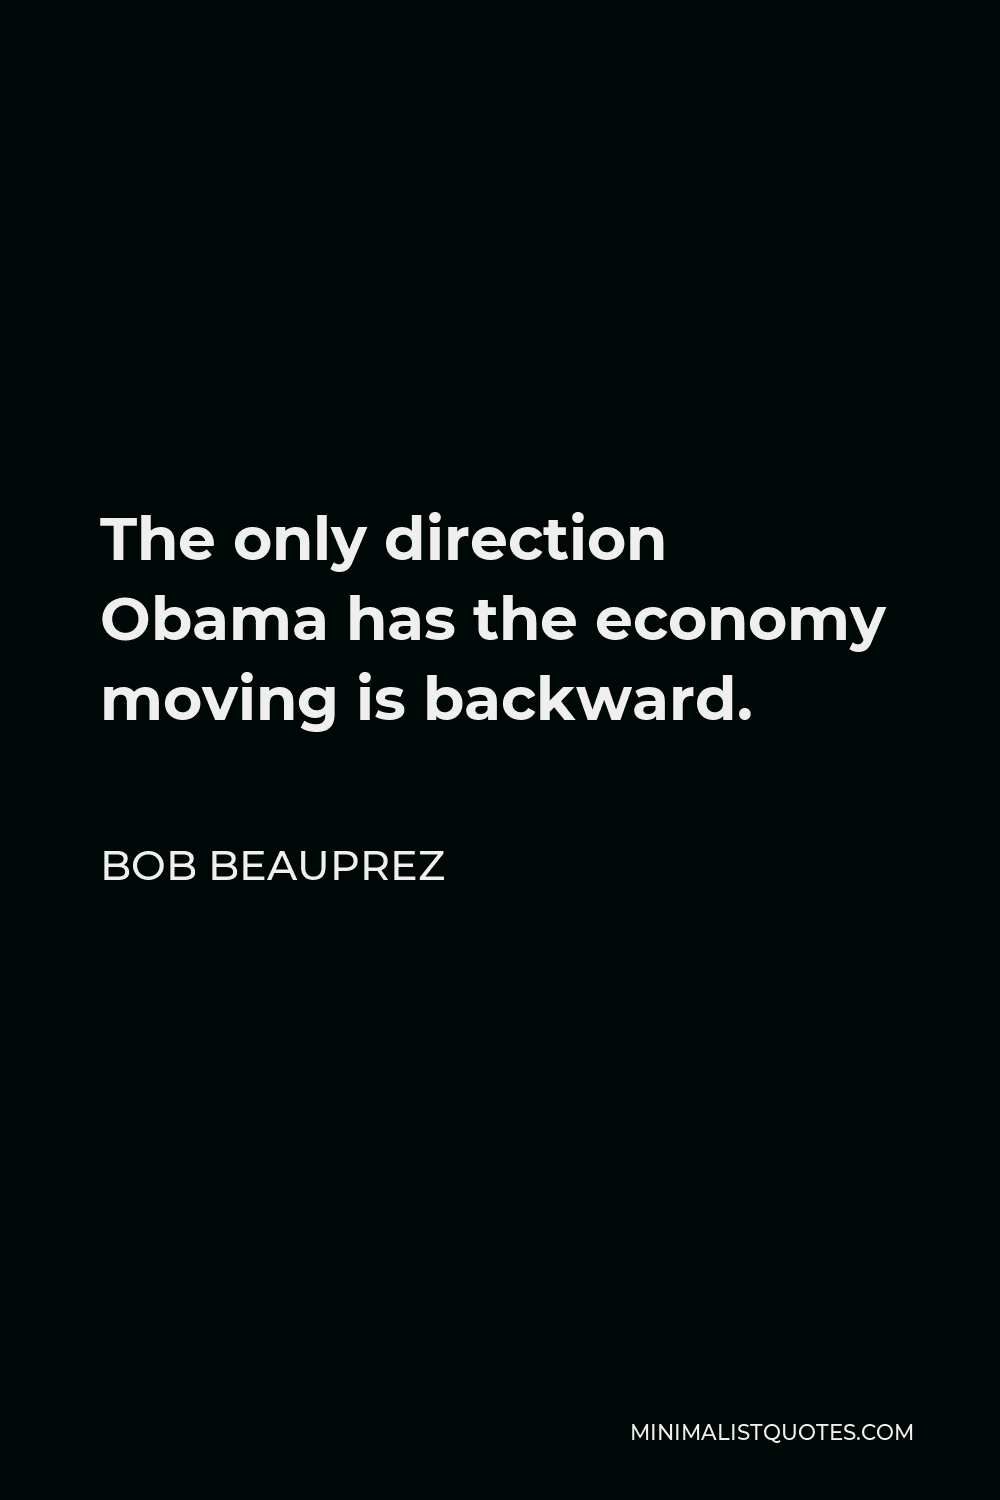 Bob Beauprez Quote - The only direction Obama has the economy moving is backward.